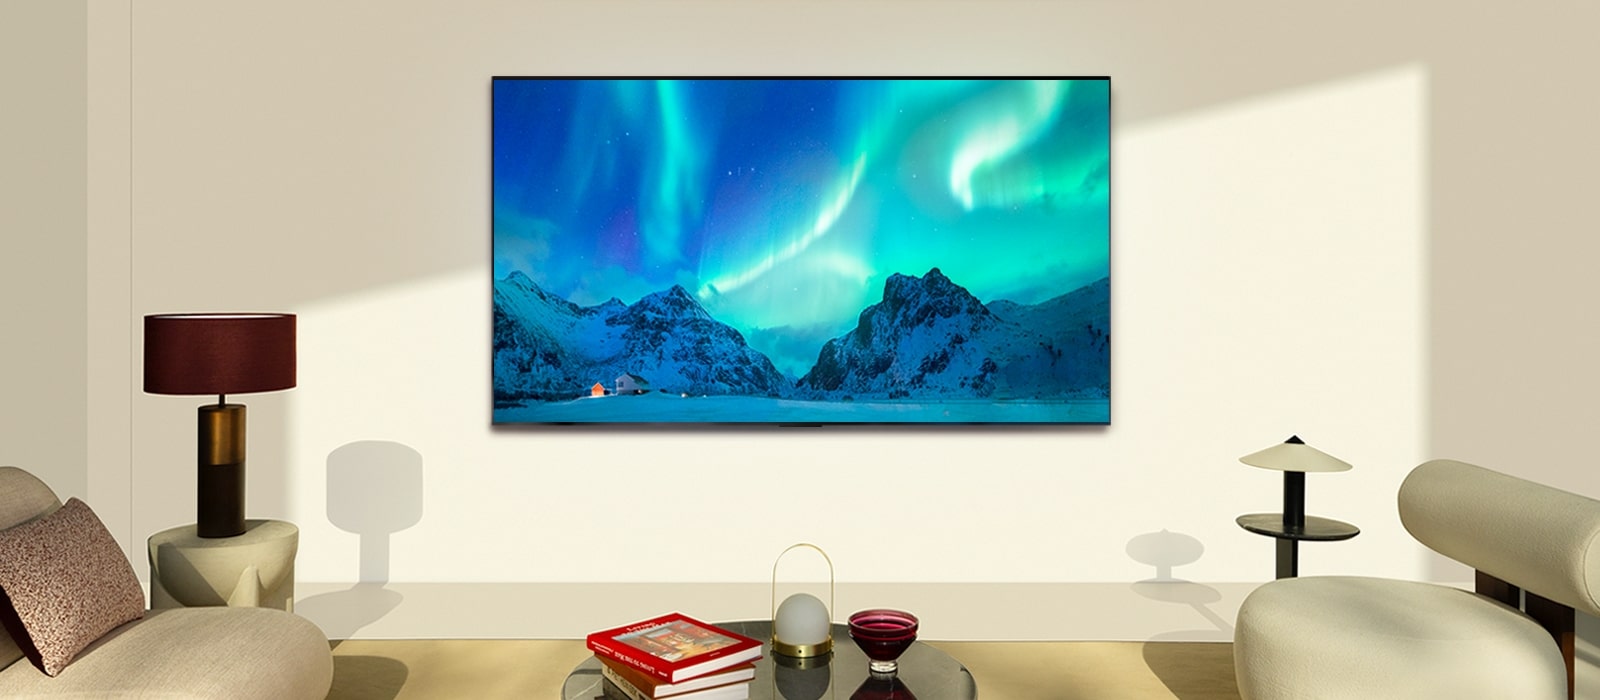 LG OLED TV and LG Soundbar in a modern living space in daytime. The image of the aurora borealis is displayed with the ideal brightness levels.	